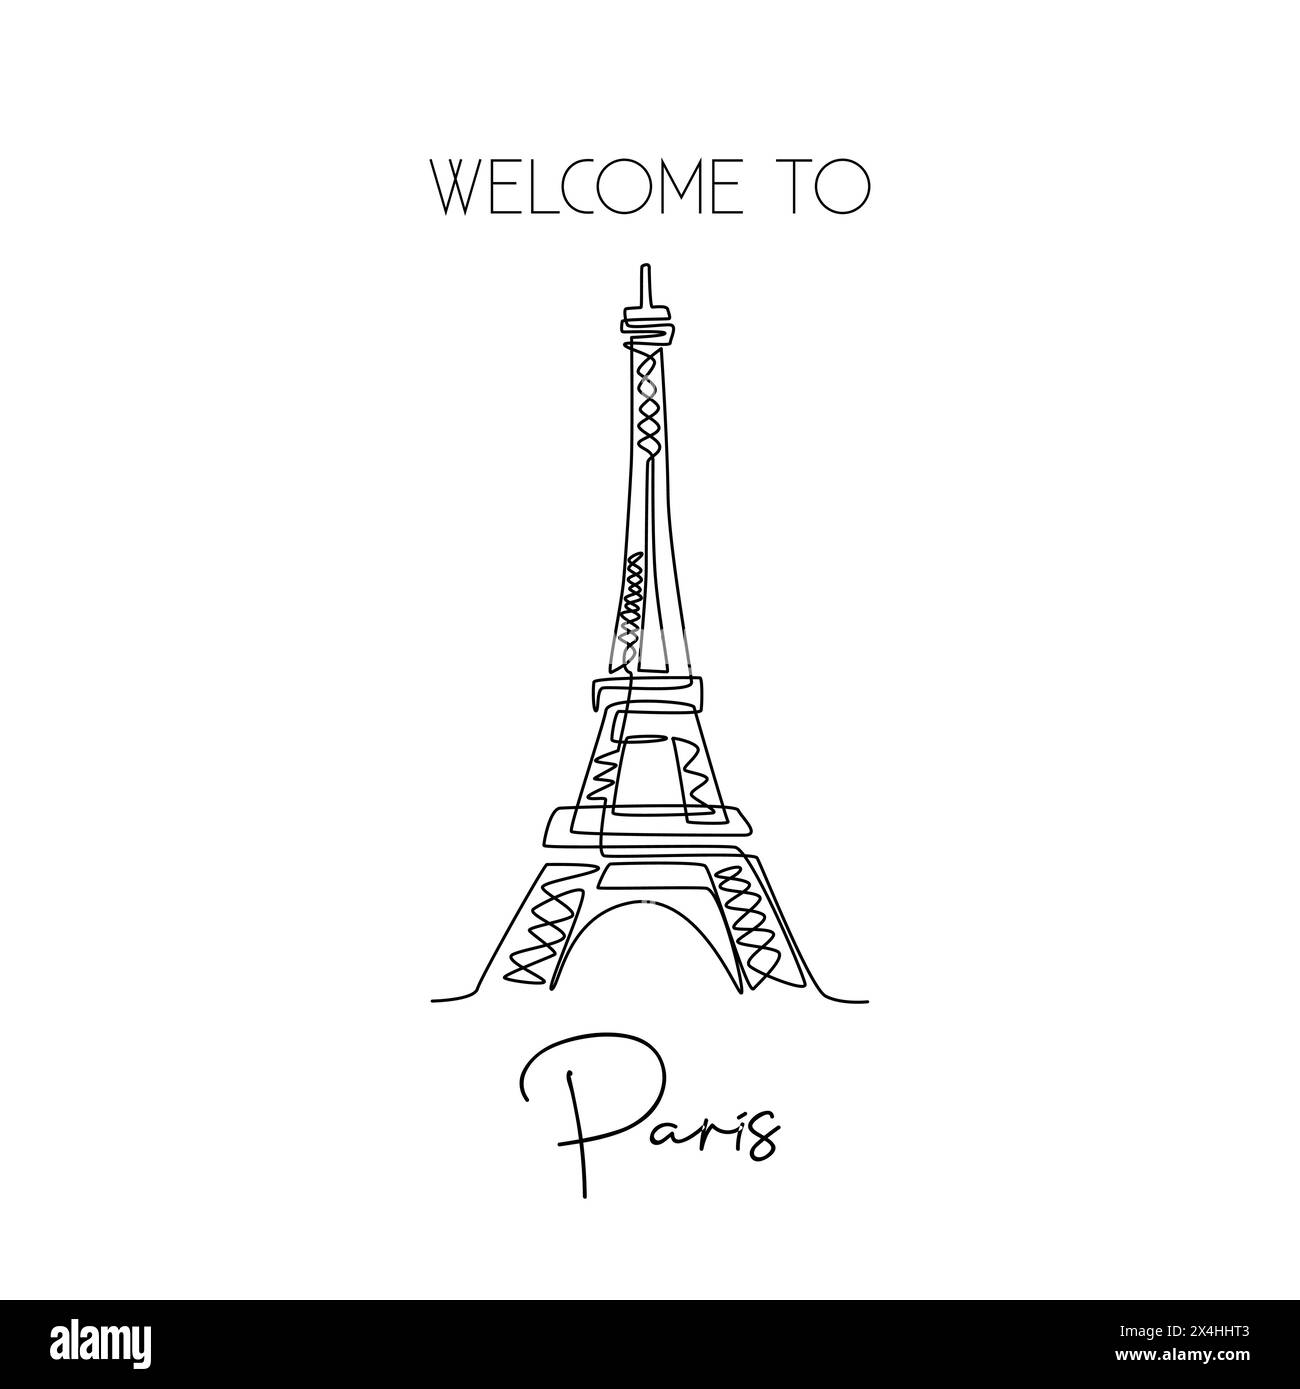 Single continuous line drawing of Eiffel Tower. Iconic landmark place in Paris, France. World travel wall decor home art poster print concept. Modern Stock Vector